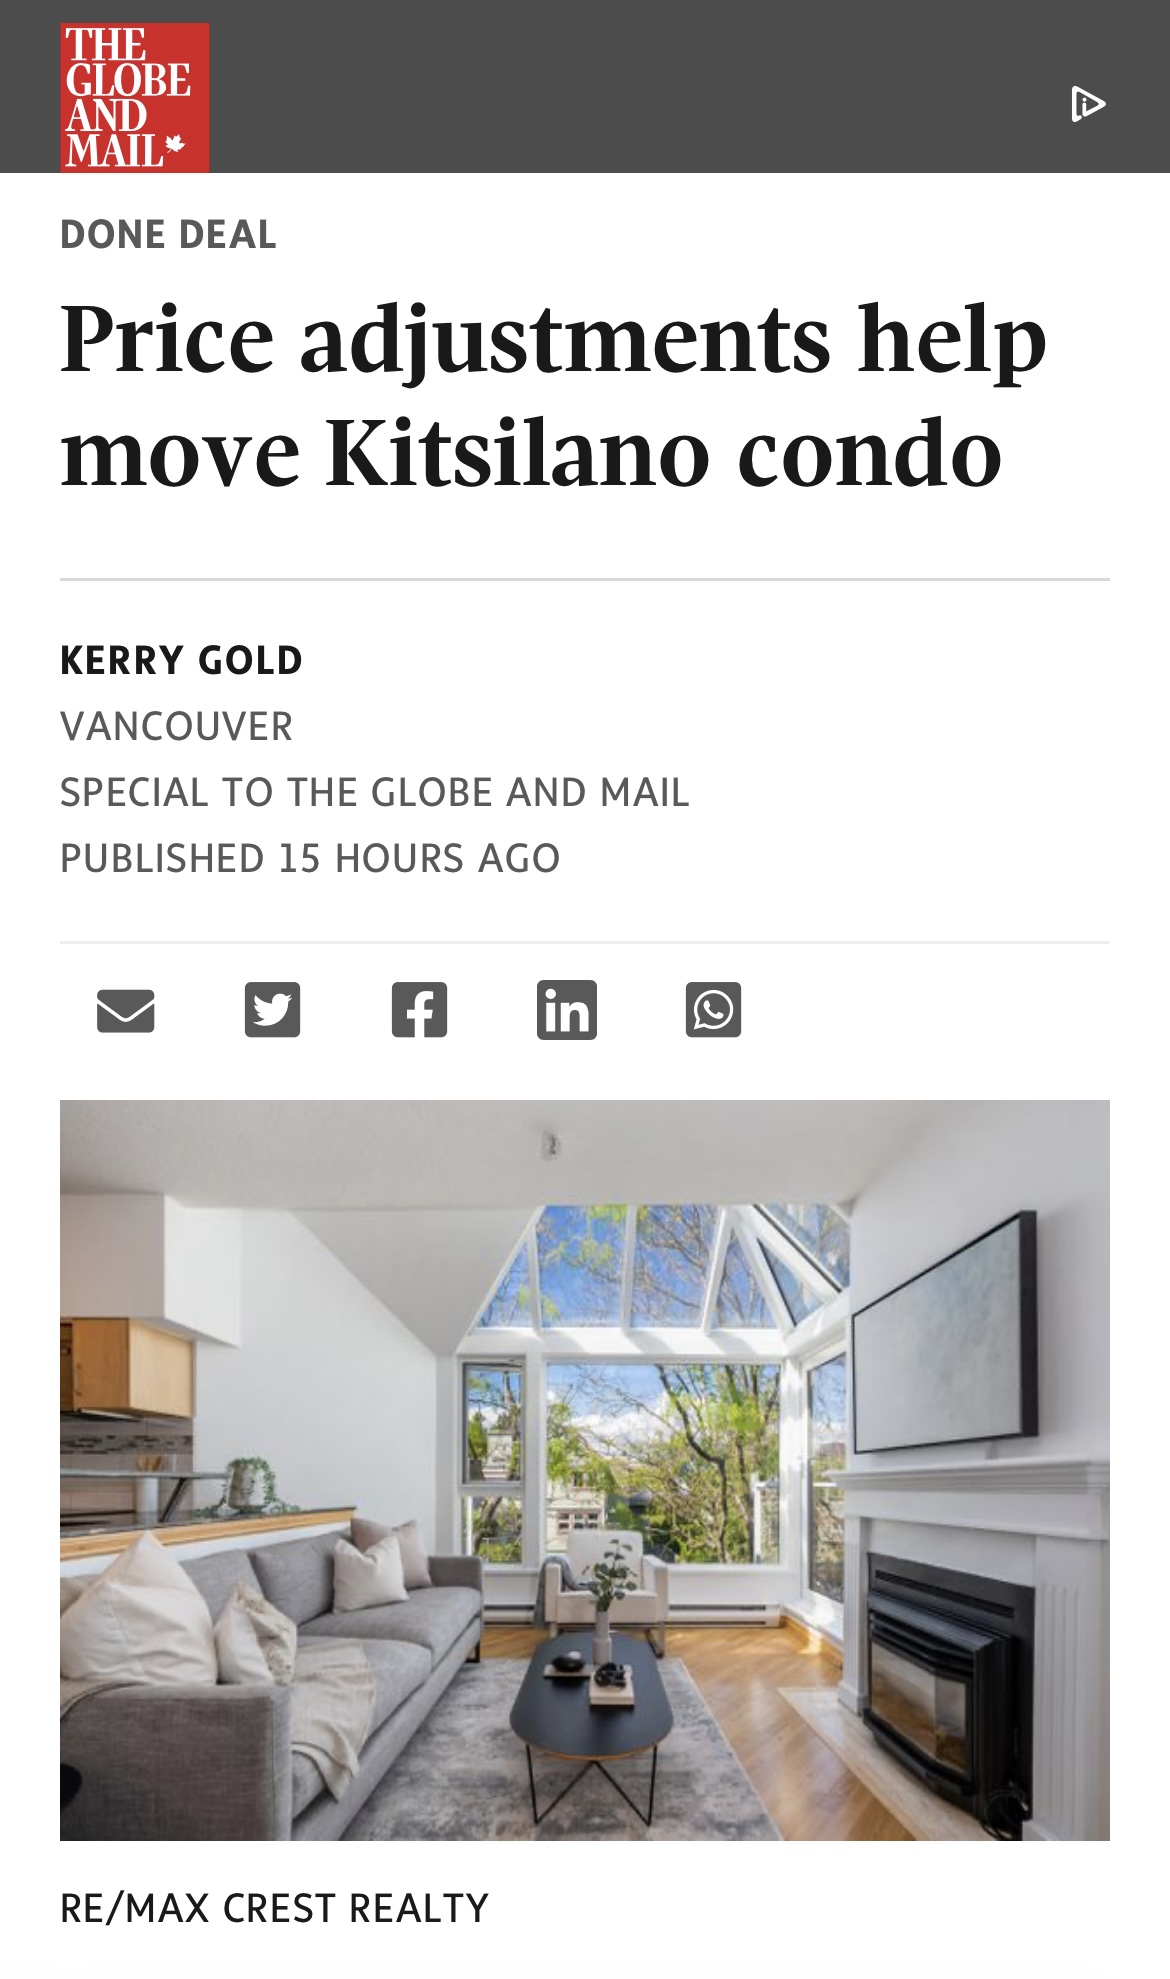 2020 W 8th Ave - Condo sale in Globe & Mail Done Deals - Paul Albrighton Quoted - By Kerry Gold